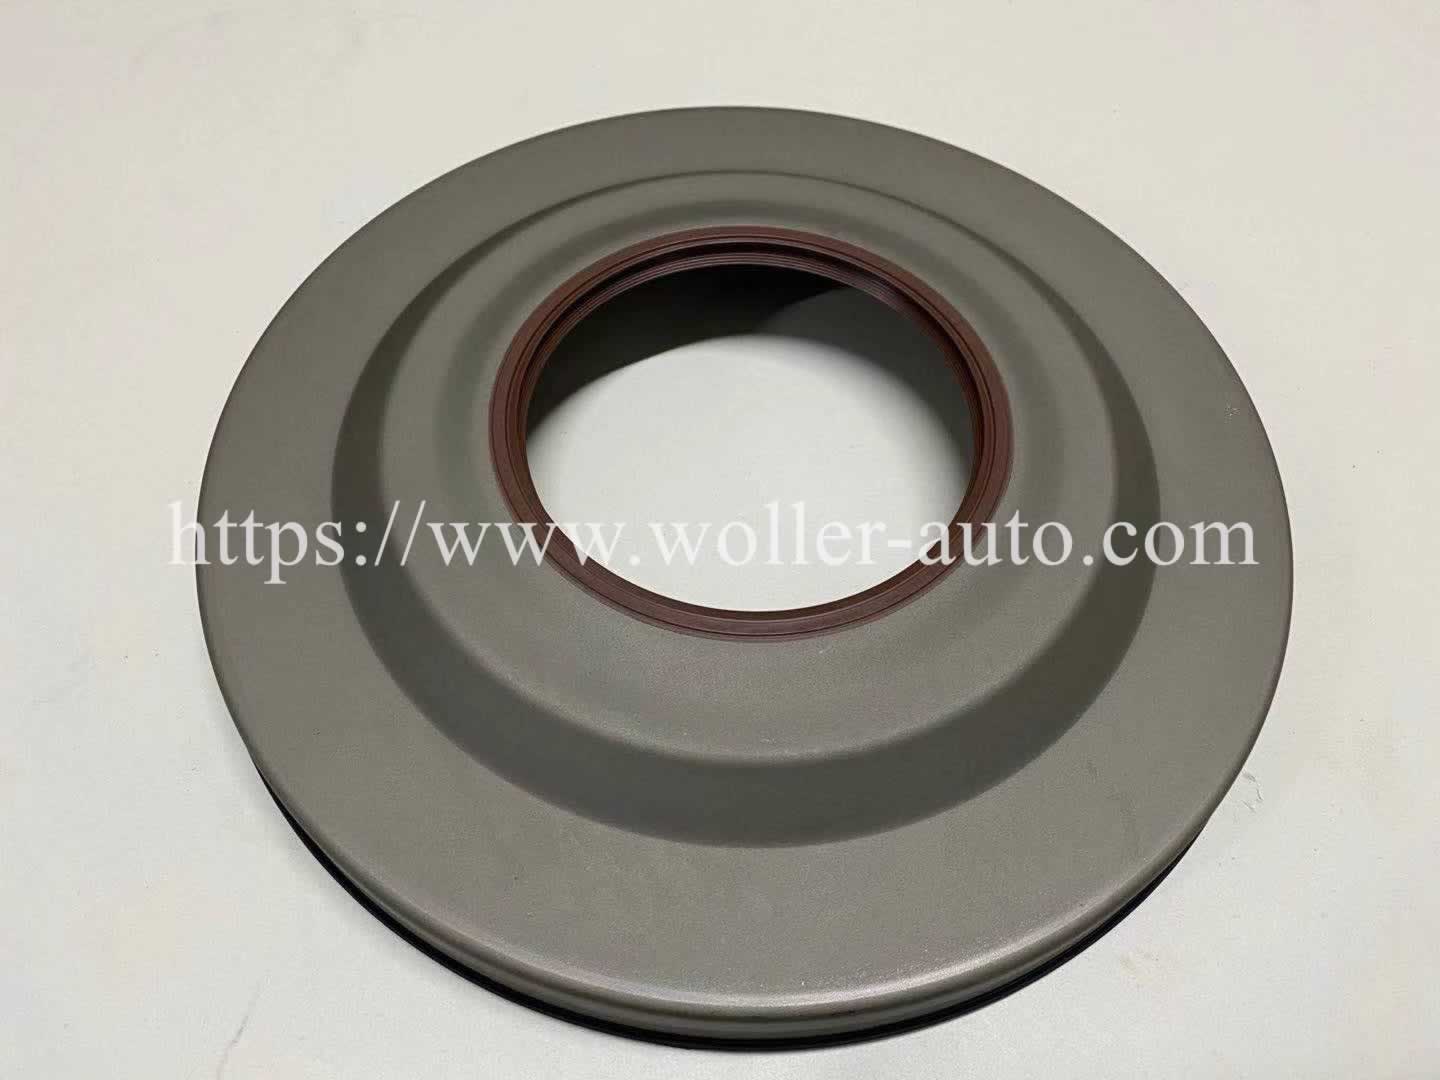 Automatic Transmission Front Cover Oil Seal 7m5r7570ab 1684808 31256729 31256845 DCT450 Mps6 For Ford Volvo